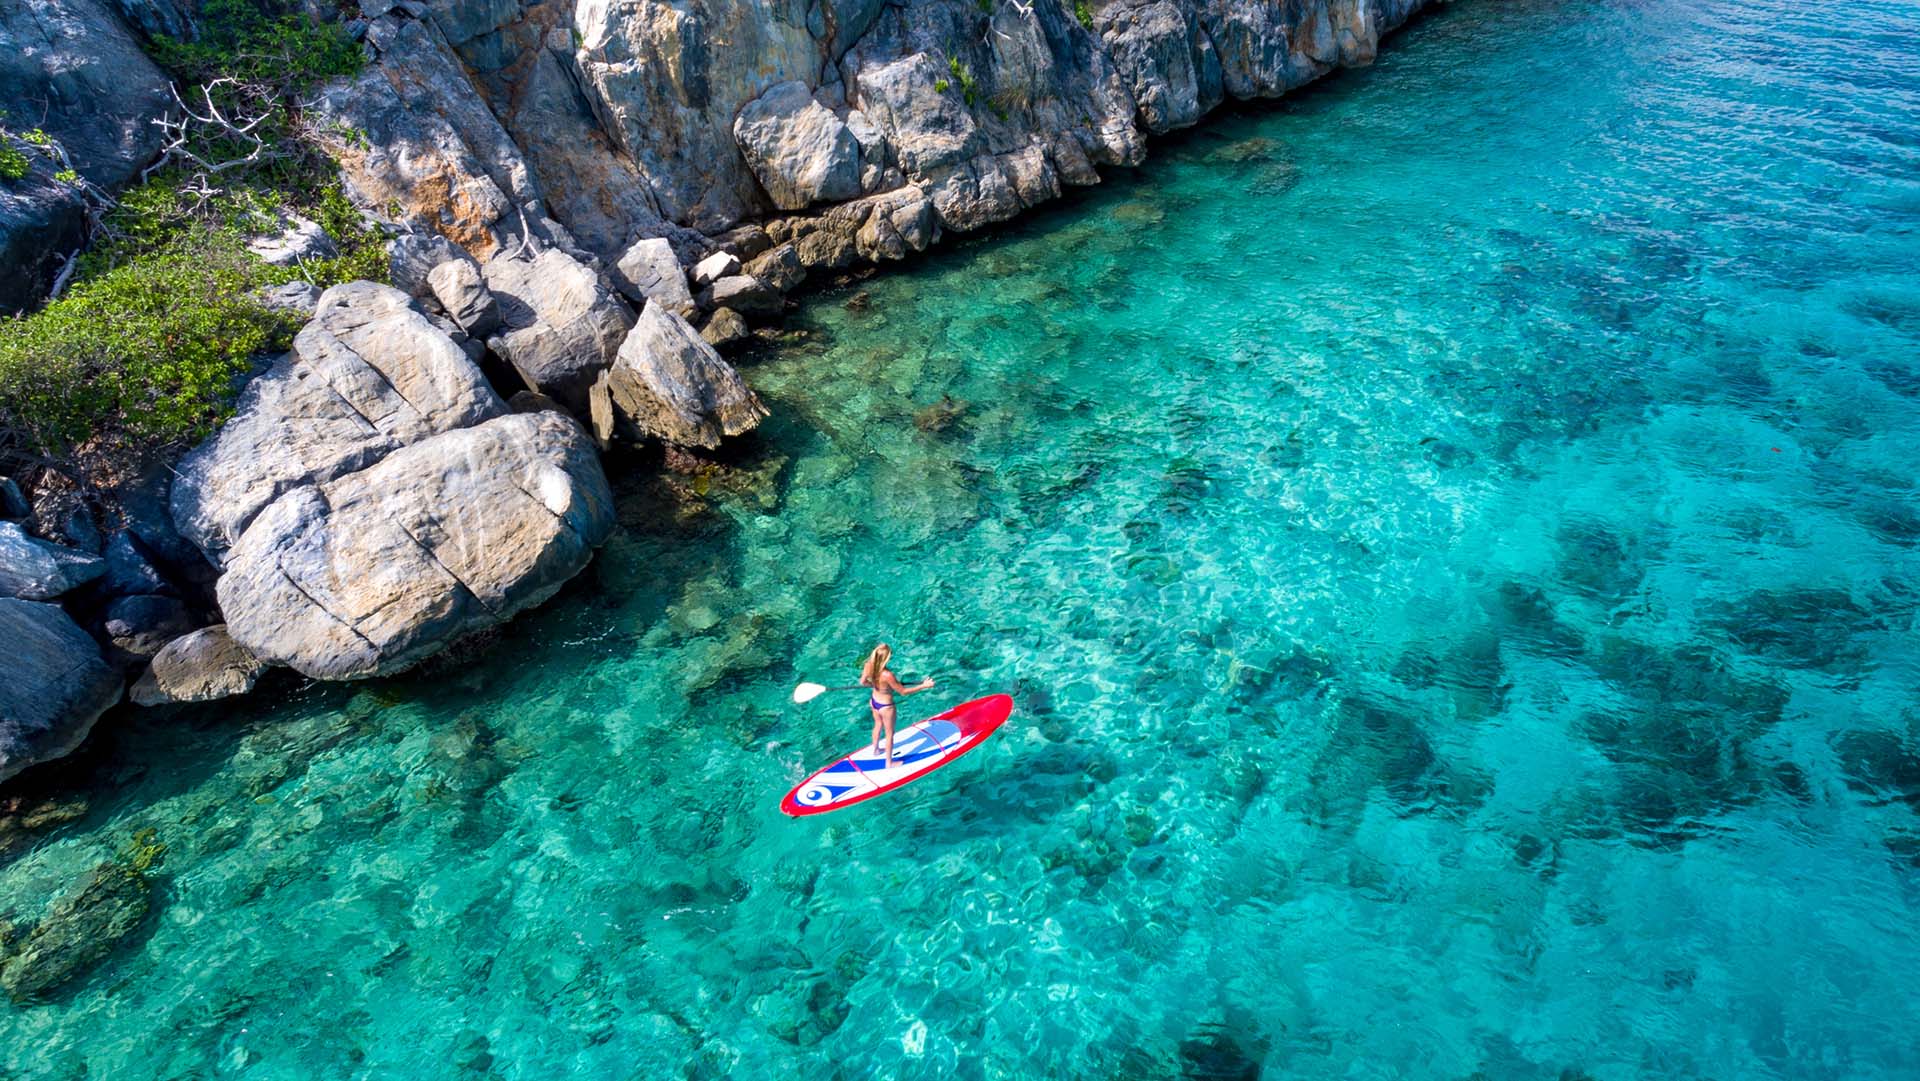 Aerial view of a woman on paddleboard in tropical water, Lovango Cay, United States Virgin Islands